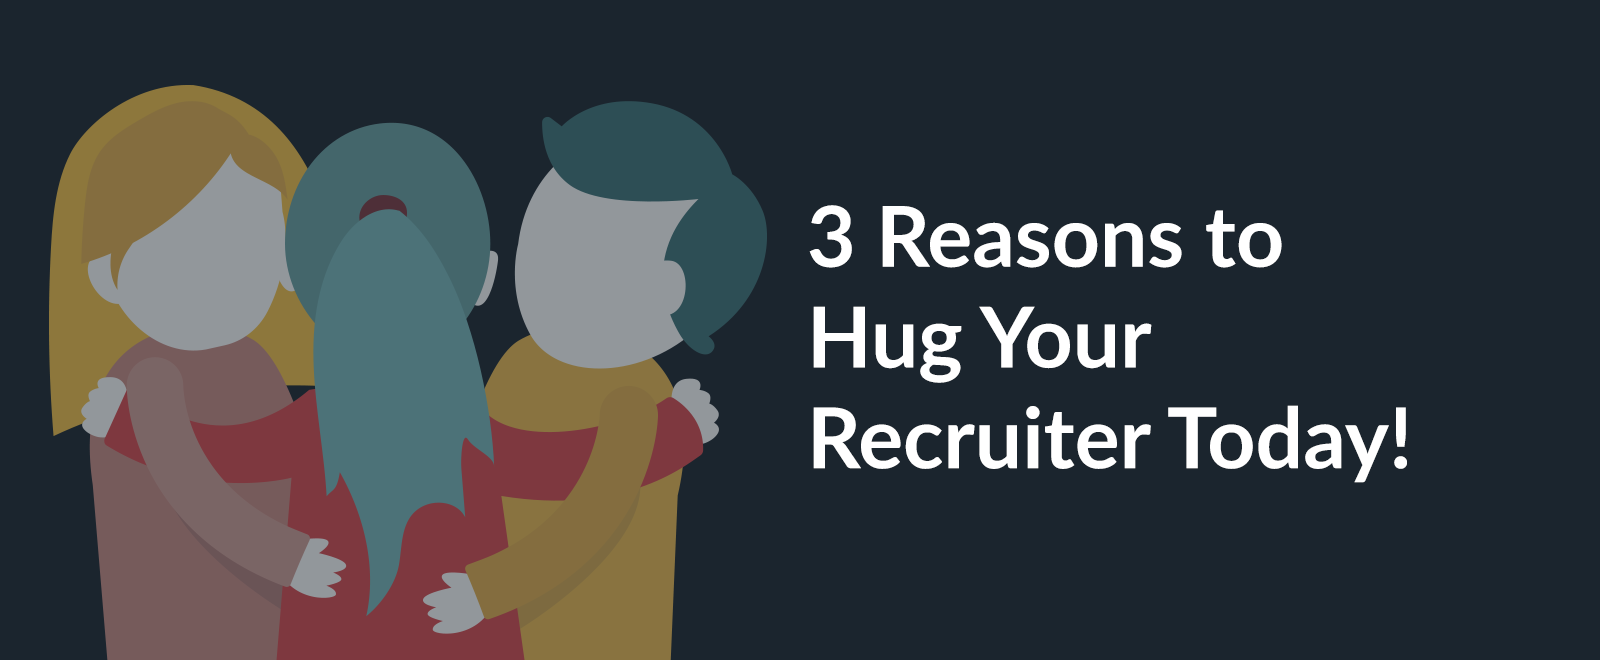 Hug Your Recruiter: The Laudi Group